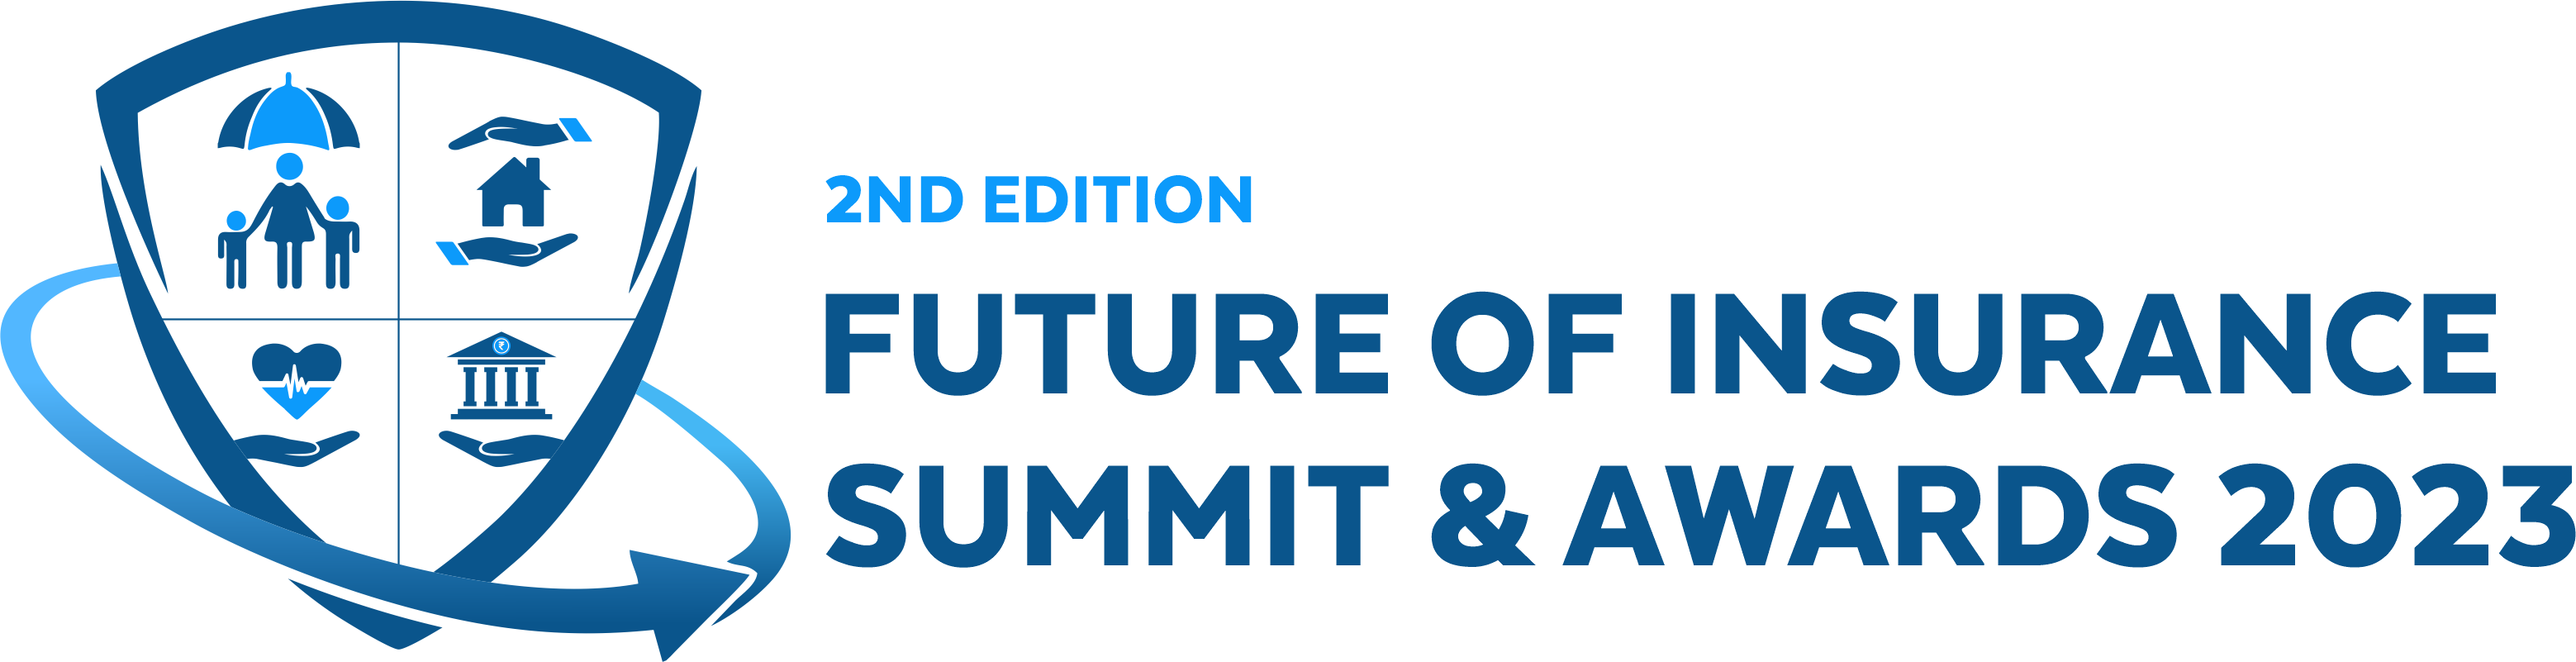 Future of Insurance summit and Awards 2023